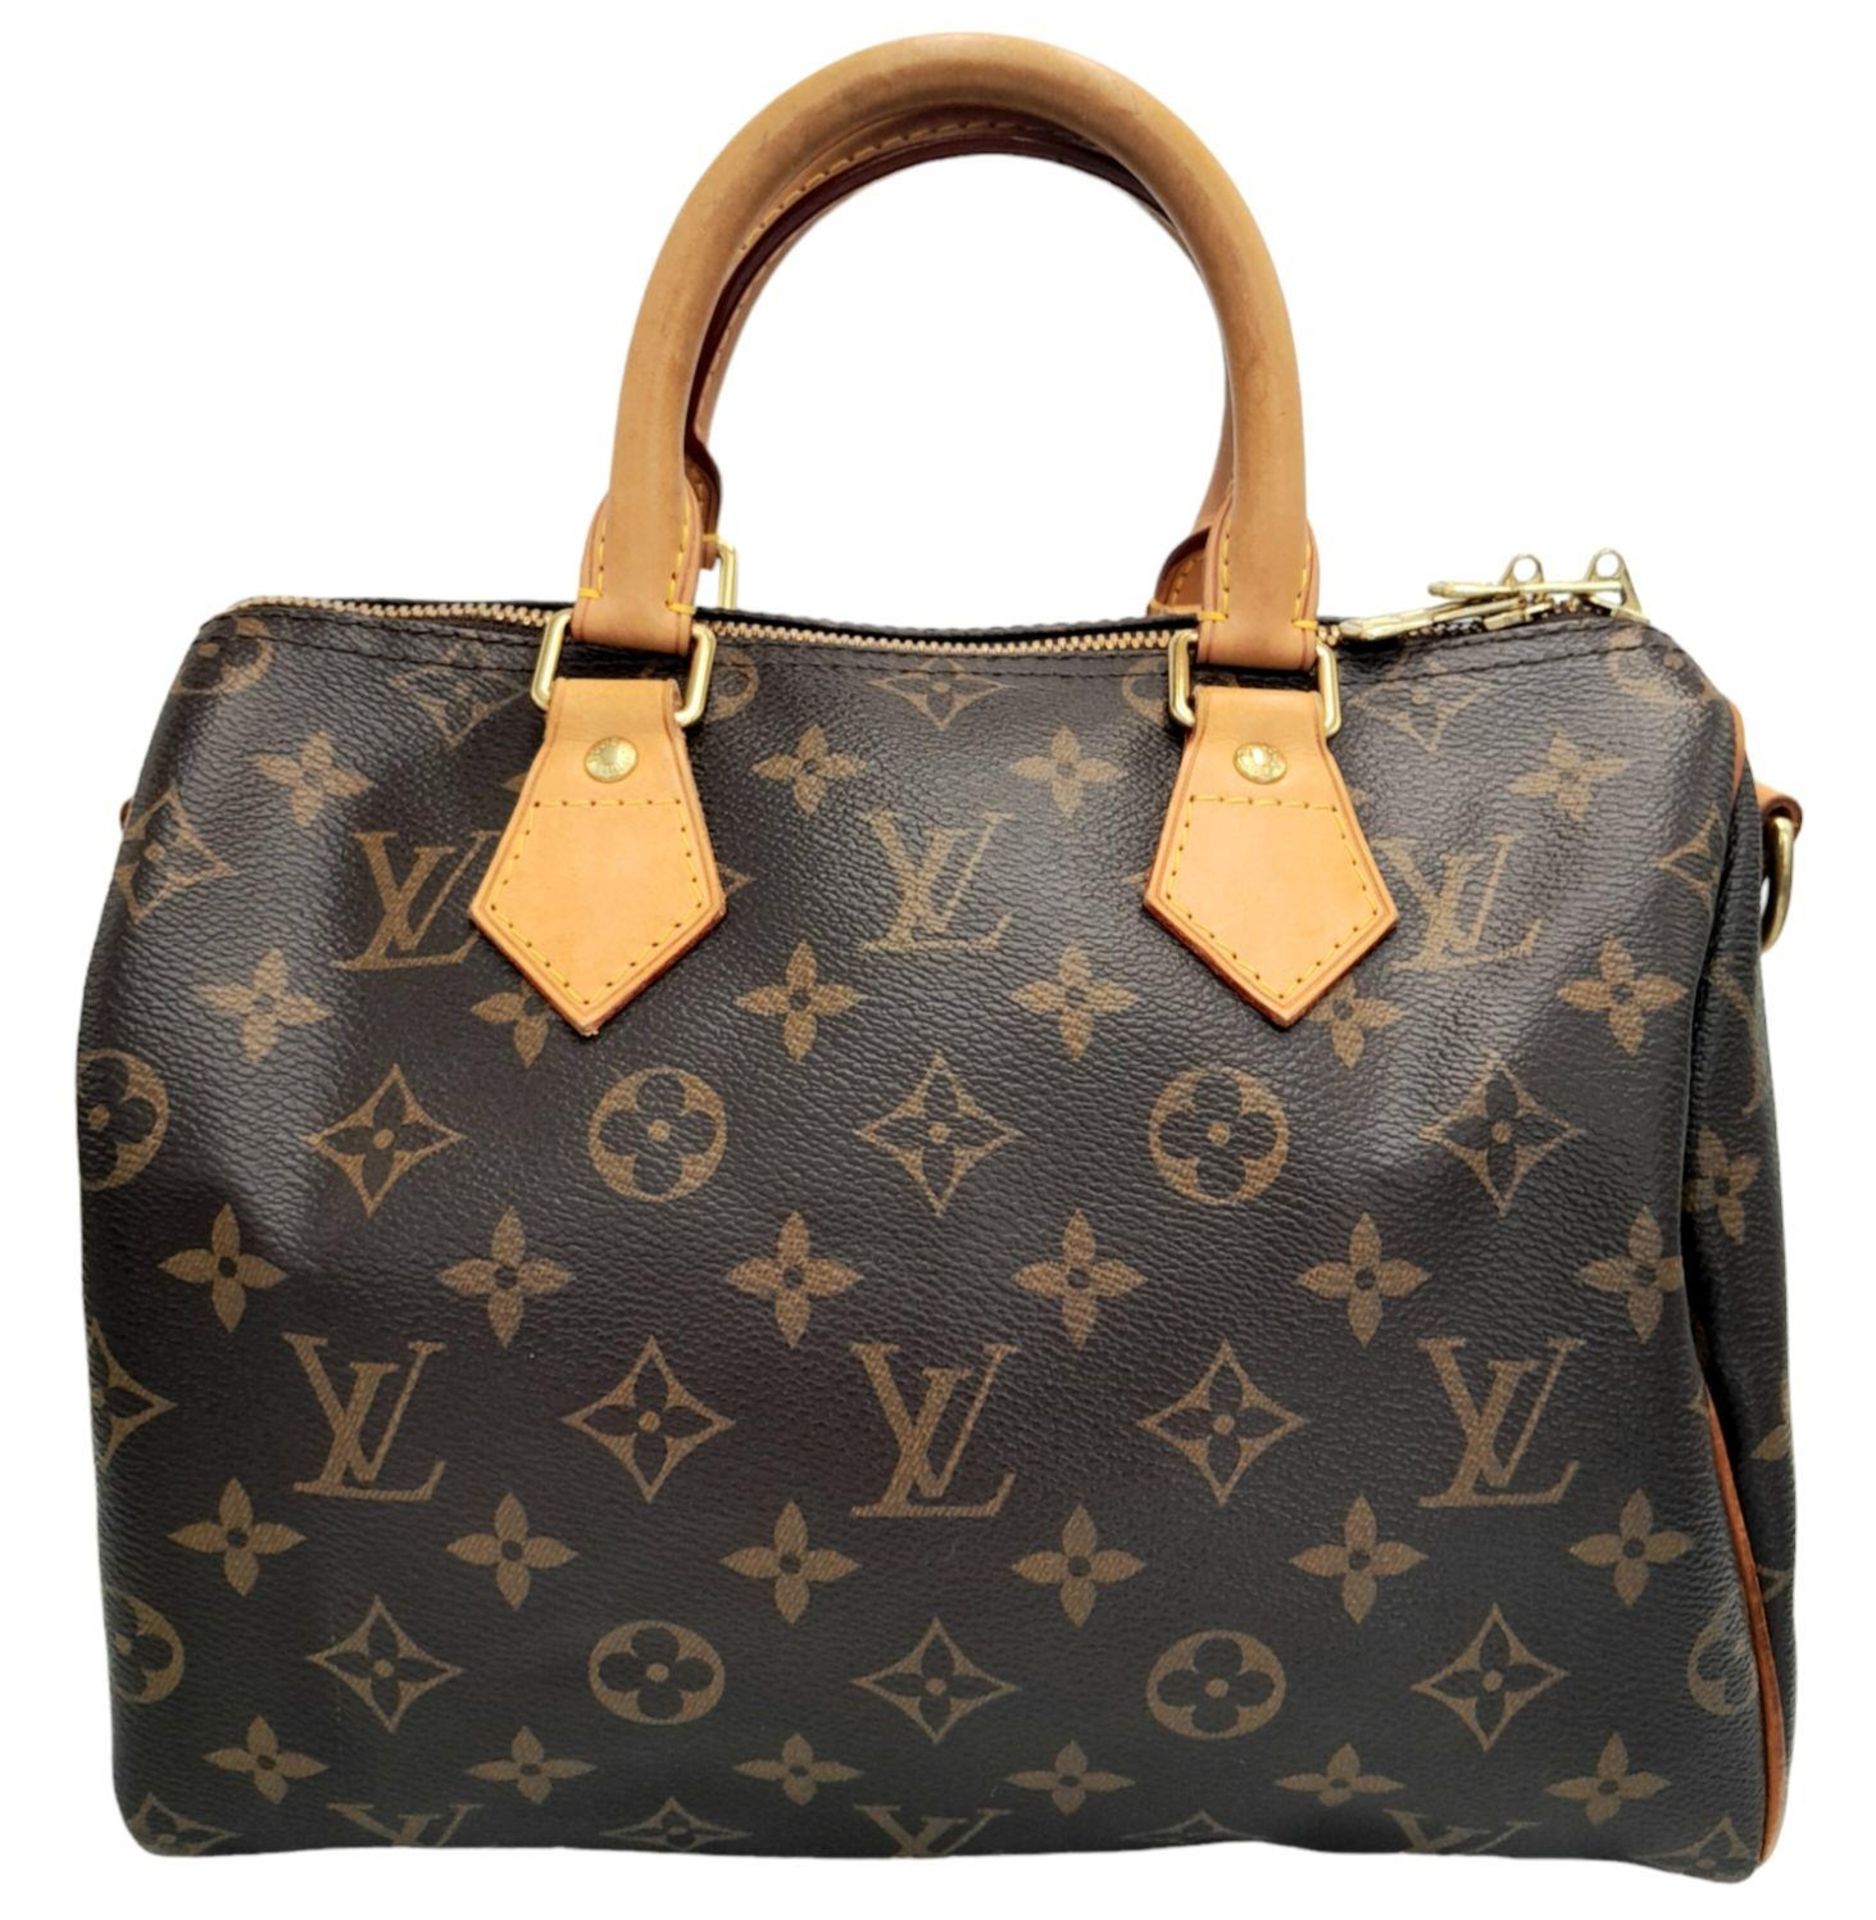 A Louis Vuitton Speedy Bag. Monogramed canvas exterior with gold-toned hardware, two rolled